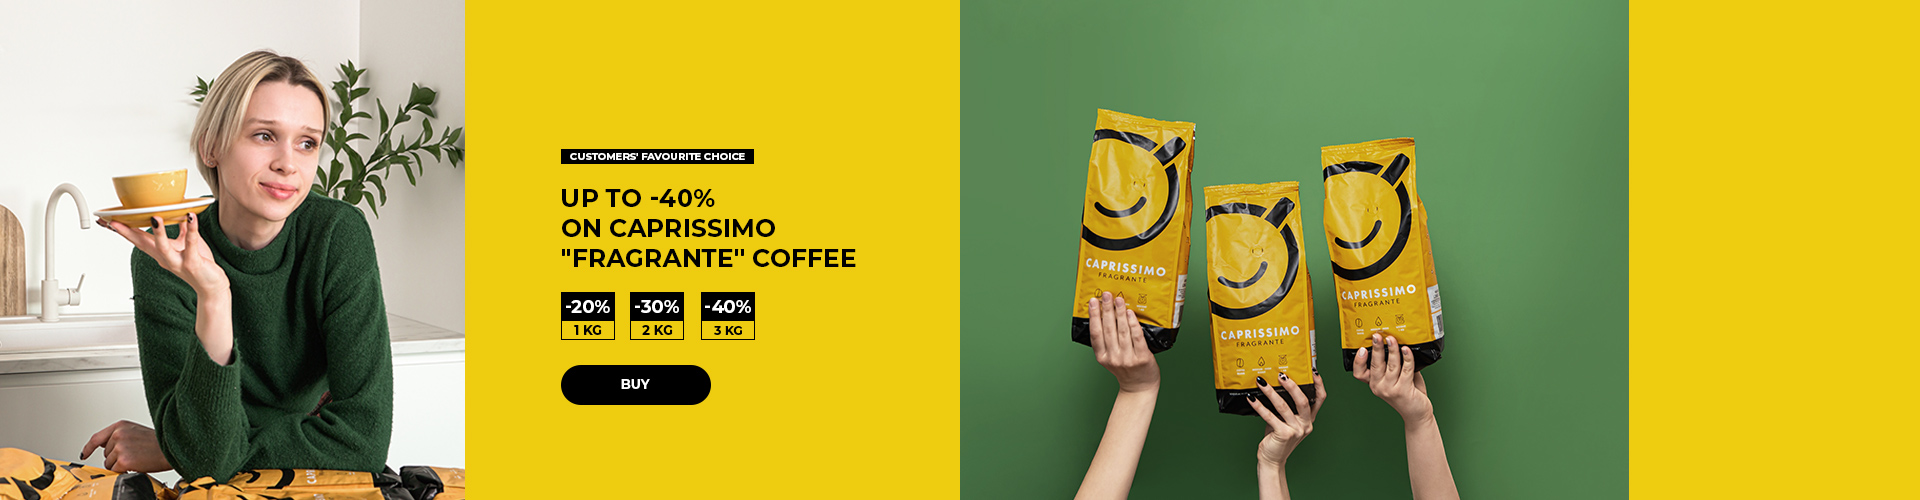 Up to -40% on CAPRISSIMO "Fragrante" coffee